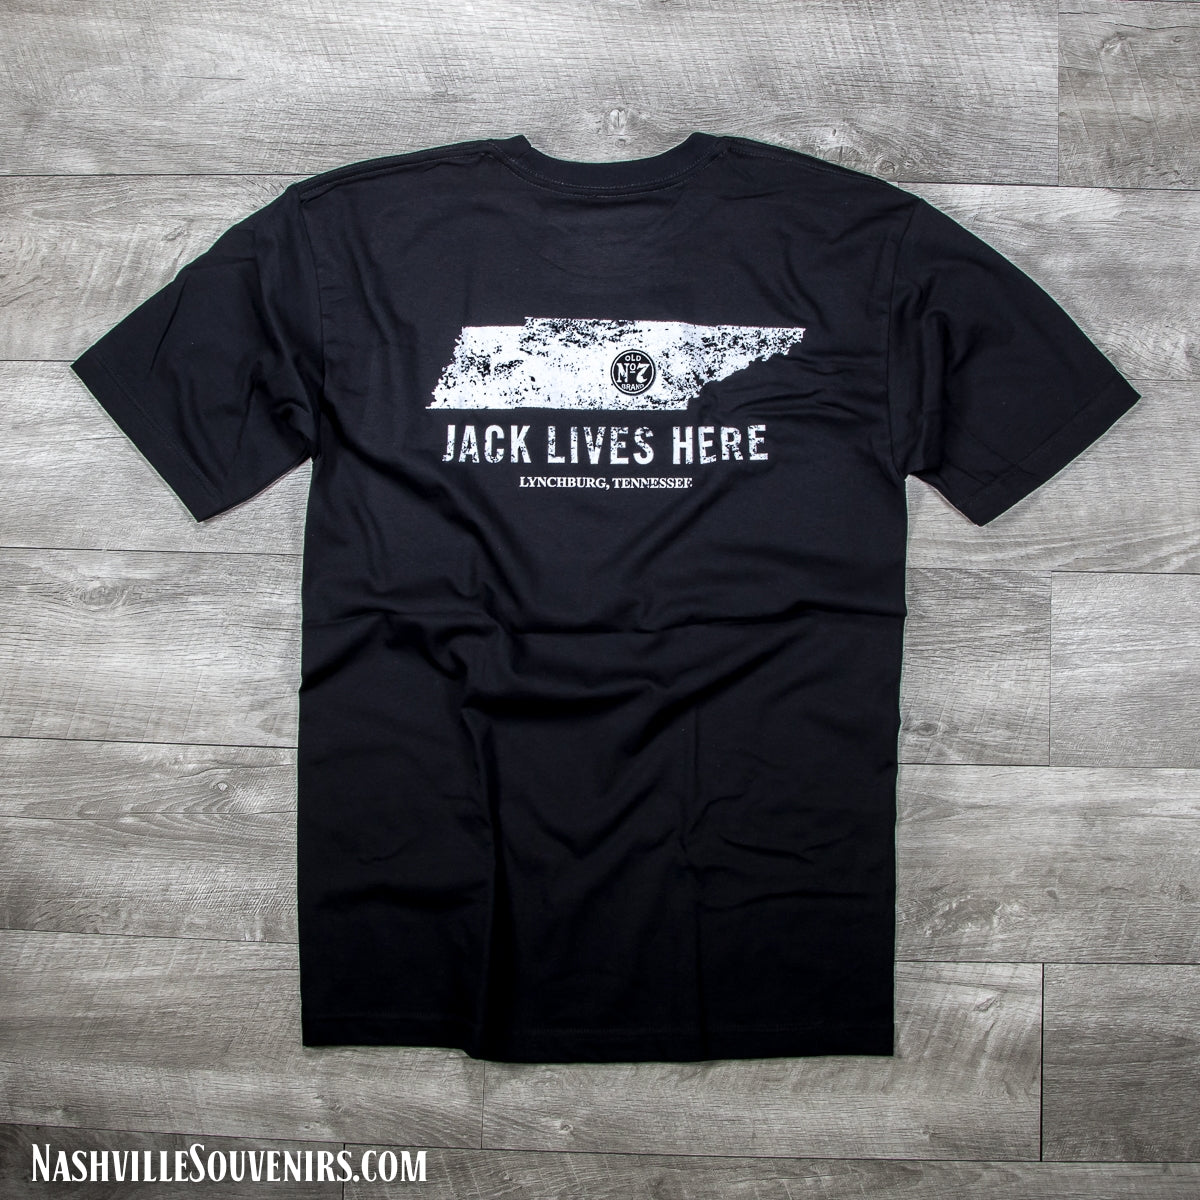 Officially licensed Jack Daniels Jack Lives Here Lynchburg T-Shirt in black with white Lynchburg logo. Get yours today with FREE SHIPPING on all US orders over $75!